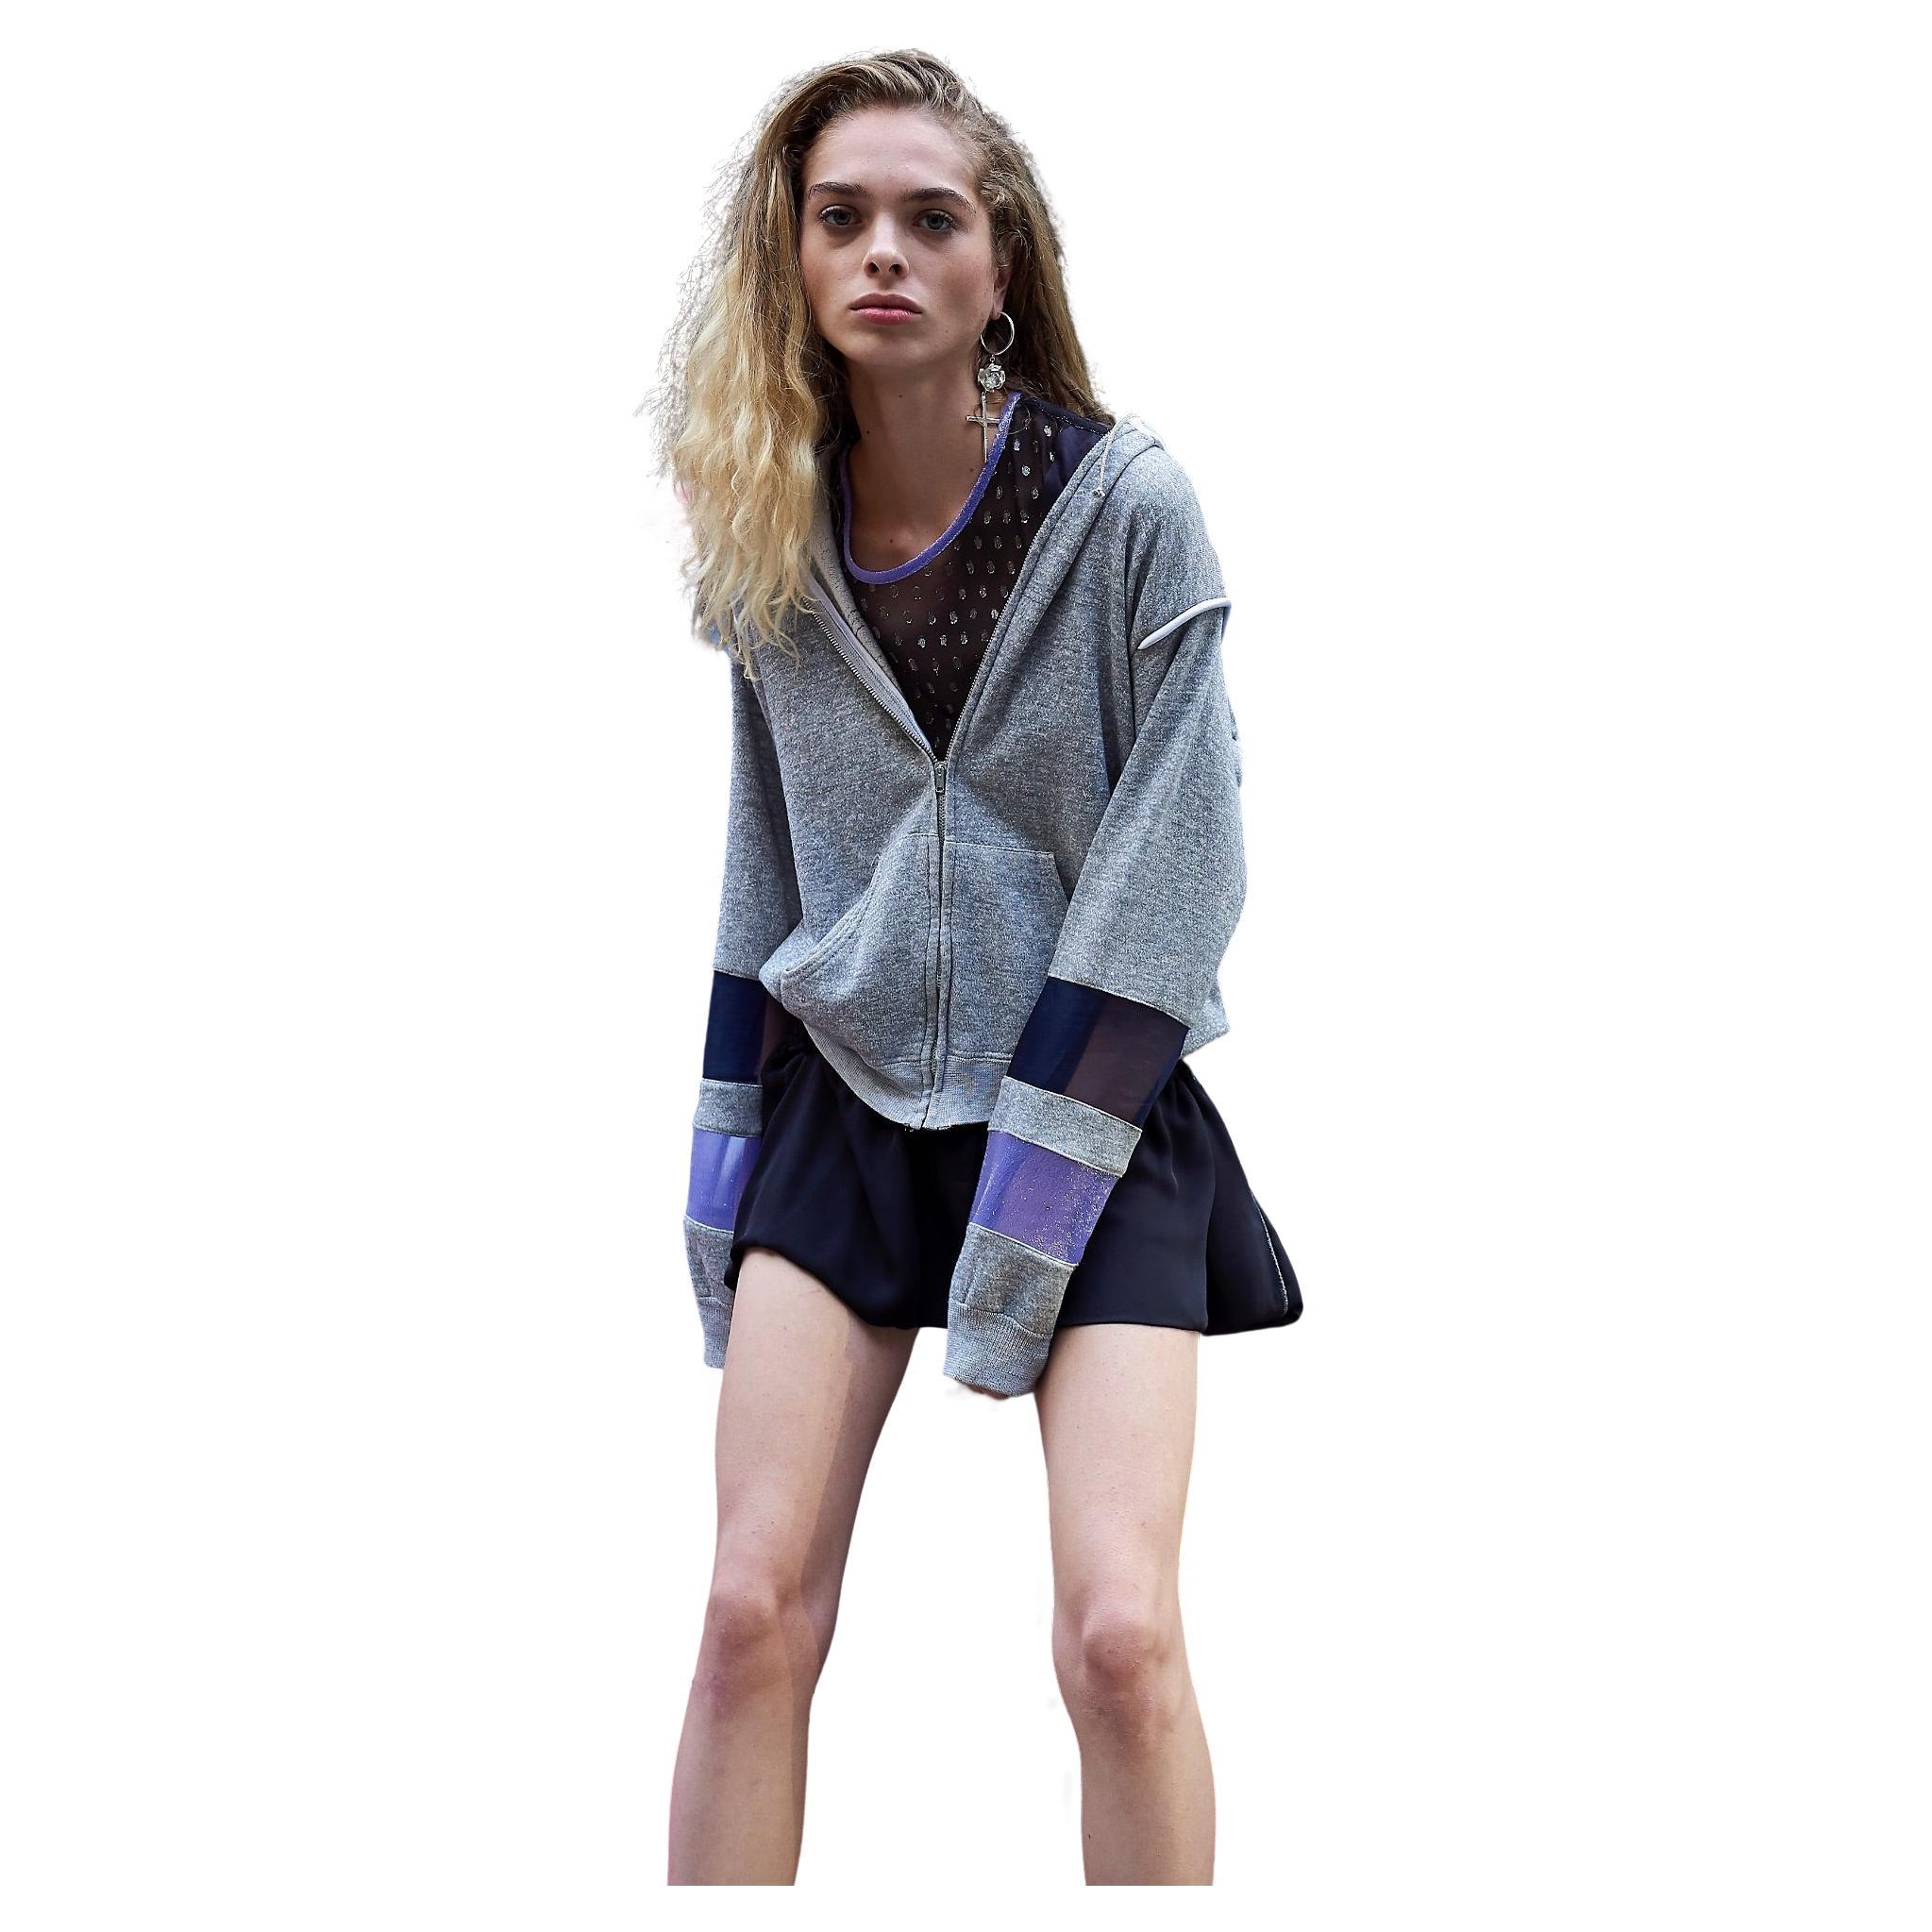 Brand: J Dauphin
One of a kind 
Embellished J Dauphin - Gray Zipr Hoodie Organza Inserts Lilac Silk Organza and Italian LightBlue 100% Silk Details
Material: 50/50 Cotton  of Jersey, Silk 100%
Embellished Sleeve with Organza Details
Hoodie from the